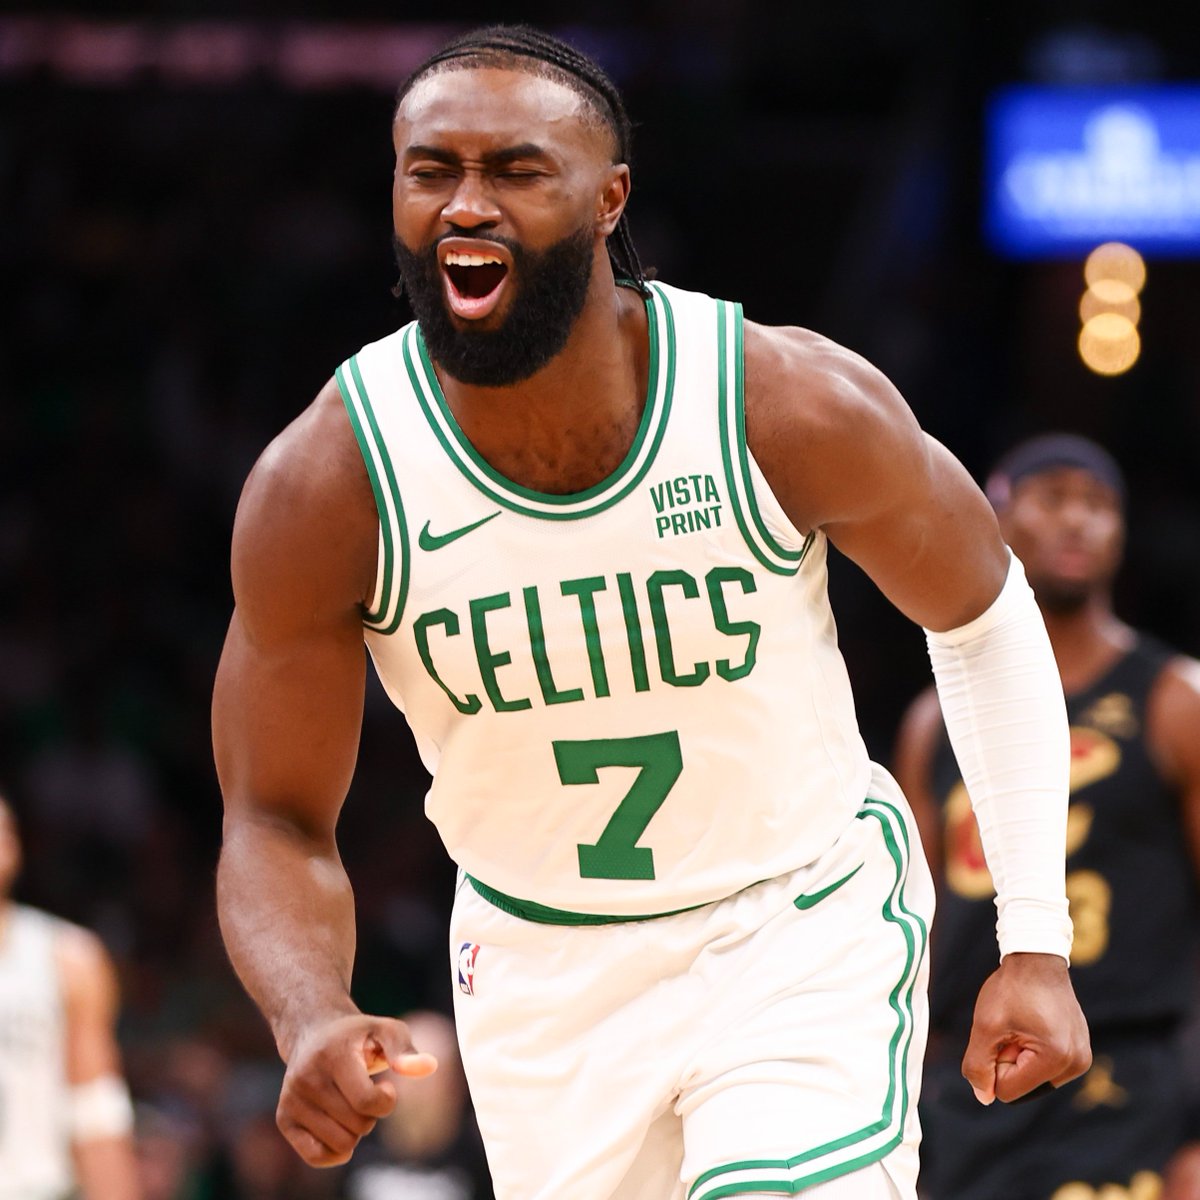 PLAYOFF JB 🍀 Jaylen Brown scores a team-high 32 points in the Celtics 120-95 win over the Cavs in Game 1 of the East semis🔥